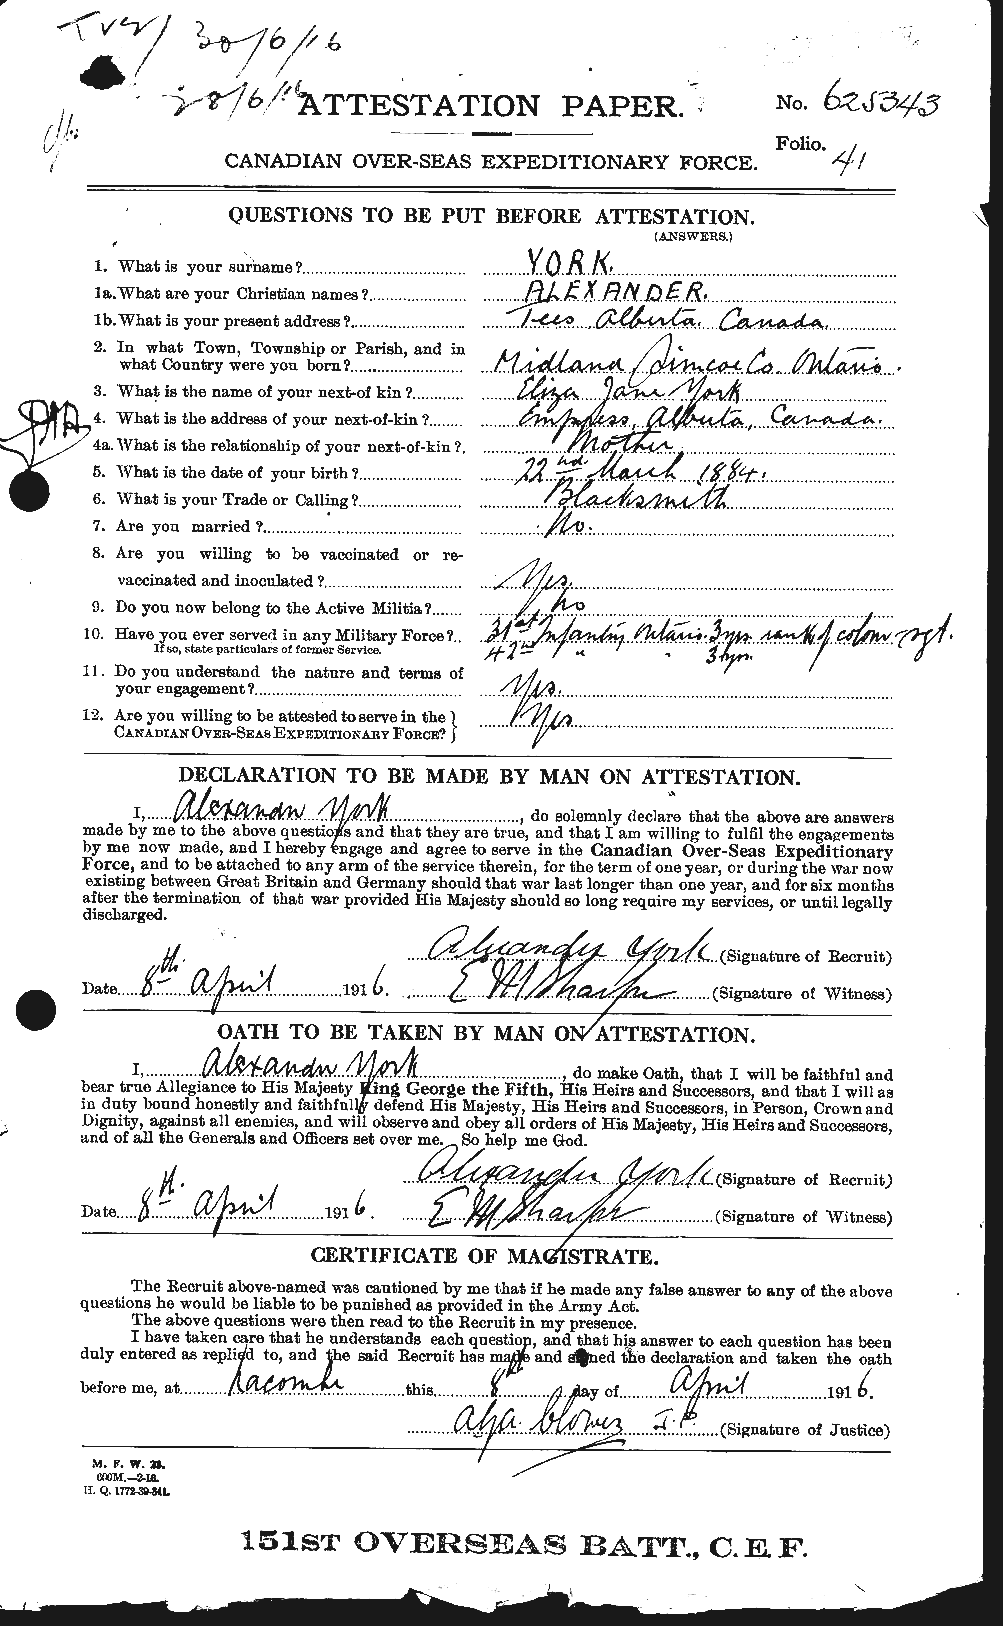 Personnel Records of the First World War - CEF 688915a